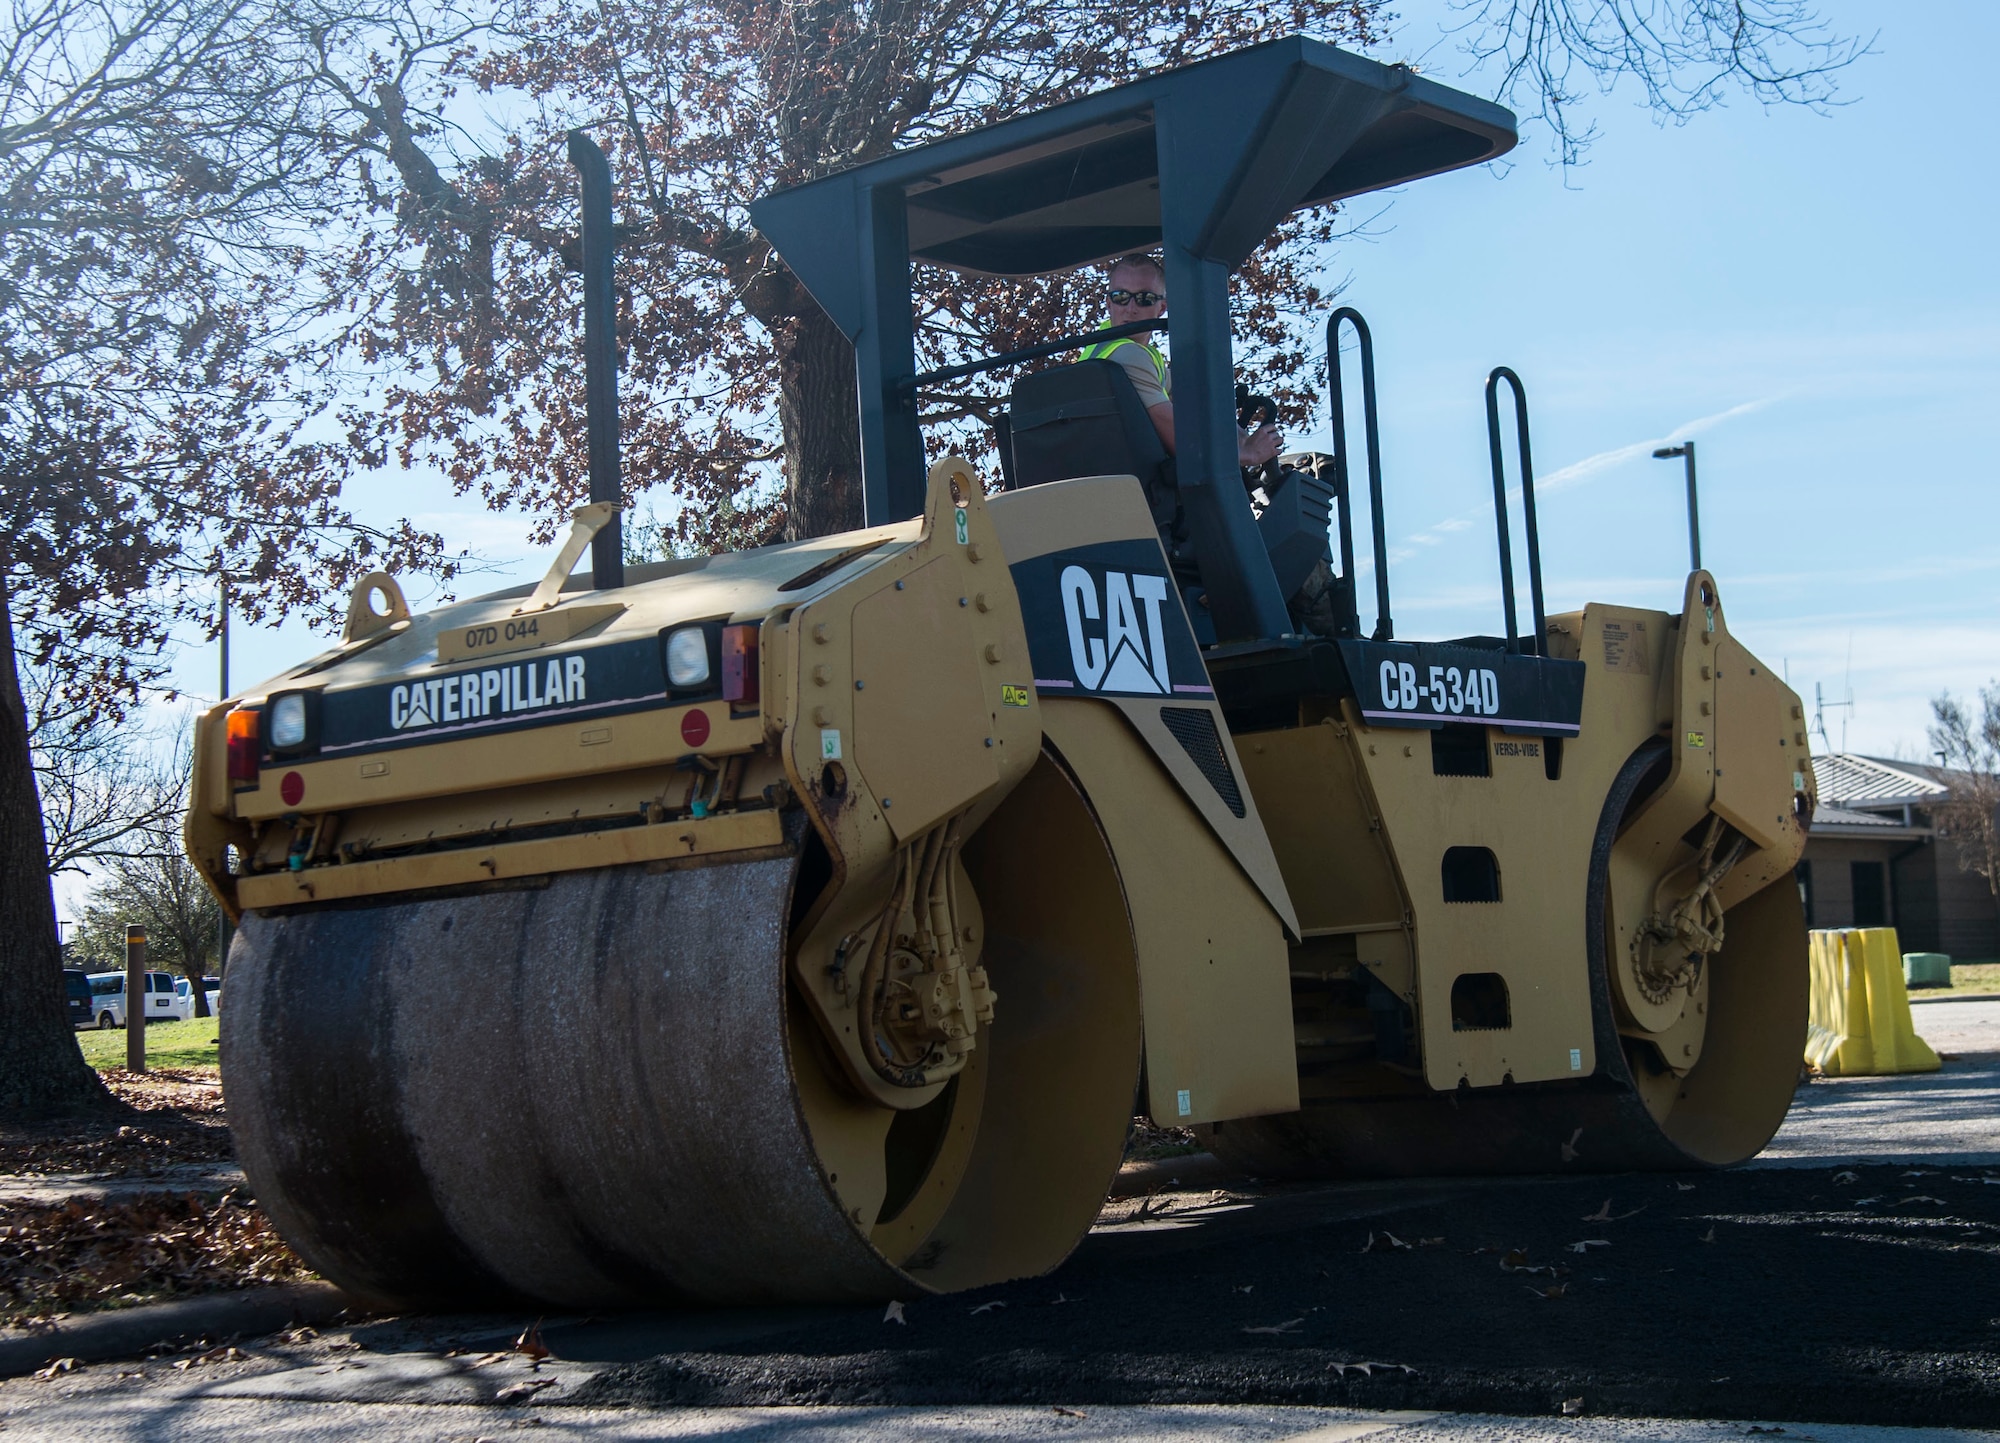 U.S. Air Force Staff Sgt. Chance Cunningham, 20th Civil Engineer Squadron pavement and construction equipment craftsman, uses a road roller to compact pavement at Shaw Air Force Base, S.C., Jan. 8, 2019.